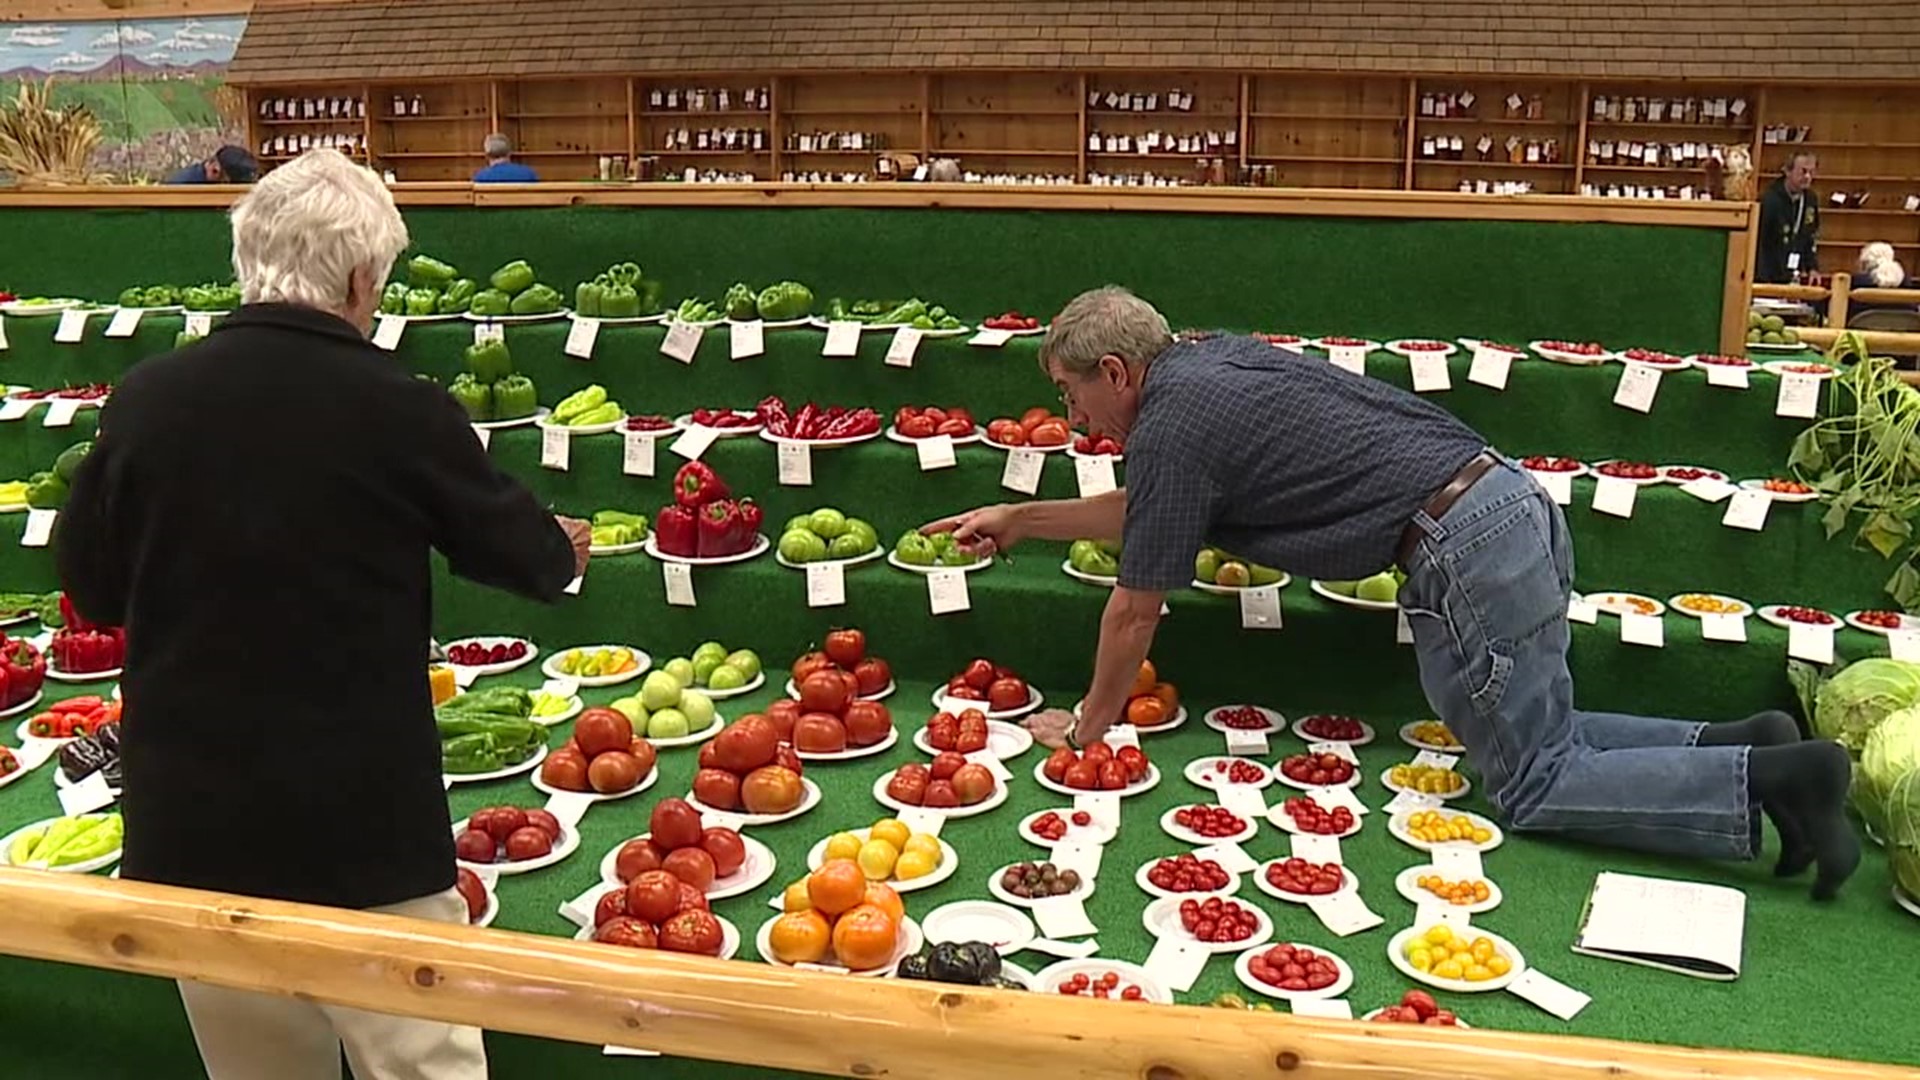 In a building filled with prize-winning produce, Jon Meyer shadows the judges doling out the blue ribbons.